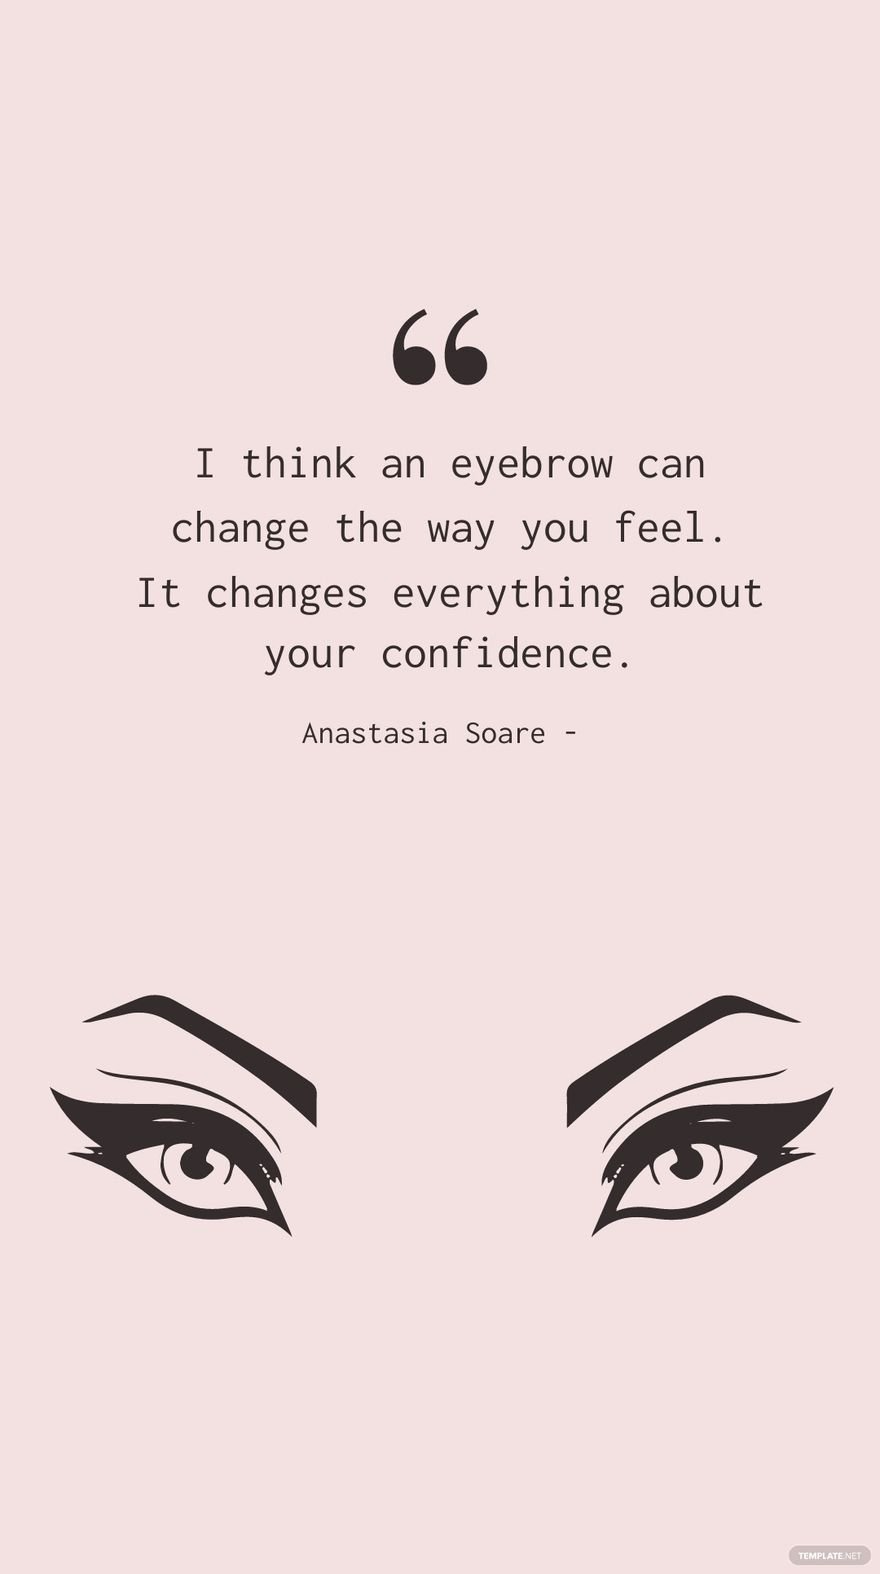 Anastasia Soare - I think an eyebrow can change the way you feel. It changes everything about your confidence. in JPG